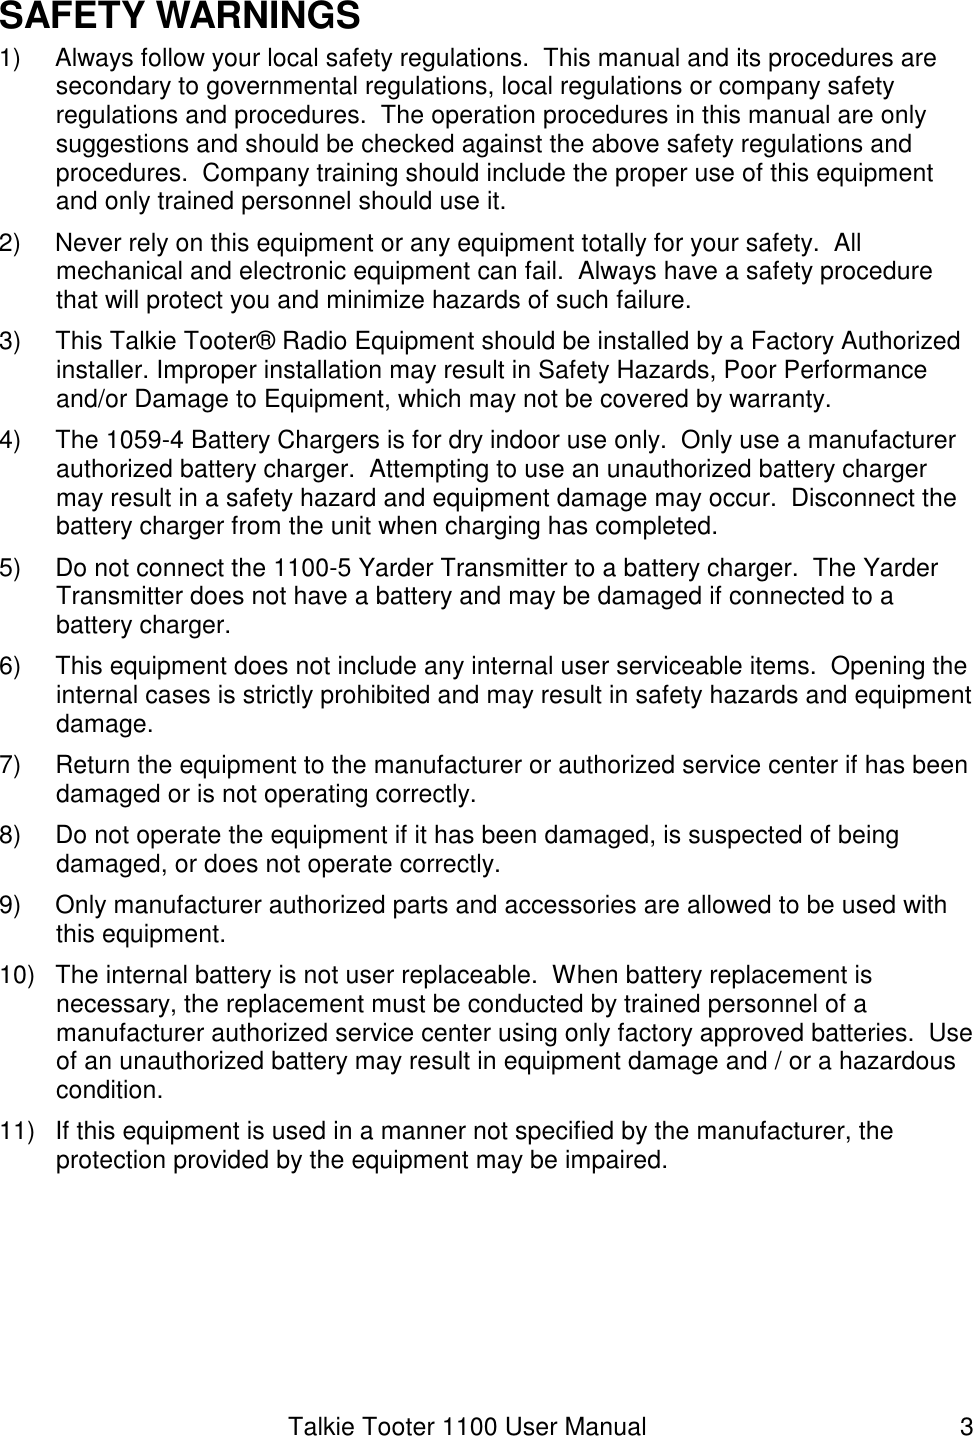 Talkie Tooter 1100 User Manual  3 SAFETY WARNINGS 1)  Always follow your local safety regulations.  This manual and its procedures are secondary to governmental regulations, local regulations or company safety regulations and procedures.  The operation procedures in this manual are only suggestions and should be checked against the above safety regulations and procedures.  Company training should include the proper use of this equipment and only trained personnel should use it. 2)  Never rely on this equipment or any equipment totally for your safety.  All mechanical and electronic equipment can fail.  Always have a safety procedure that will protect you and minimize hazards of such failure. 3)  This Talkie Tooter® Radio Equipment should be installed by a Factory Authorized installer. Improper installation may result in Safety Hazards, Poor Performance and/or Damage to Equipment, which may not be covered by warranty. 4)  The 1059-4 Battery Chargers is for dry indoor use only.  Only use a manufacturer authorized battery charger.  Attempting to use an unauthorized battery charger may result in a safety hazard and equipment damage may occur.  Disconnect the battery charger from the unit when charging has completed.   5)  Do not connect the 1100-5 Yarder Transmitter to a battery charger.  The Yarder Transmitter does not have a battery and may be damaged if connected to a battery charger. 6)  This equipment does not include any internal user serviceable items.  Opening the internal cases is strictly prohibited and may result in safety hazards and equipment damage.   7)  Return the equipment to the manufacturer or authorized service center if has been damaged or is not operating correctly.   8)  Do not operate the equipment if it has been damaged, is suspected of being damaged, or does not operate correctly. 9)  Only manufacturer authorized parts and accessories are allowed to be used with this equipment.  10)  The internal battery is not user replaceable.  When battery replacement is necessary, the replacement must be conducted by trained personnel of a manufacturer authorized service center using only factory approved batteries.  Use of an unauthorized battery may result in equipment damage and / or a hazardous condition. 11)  If this equipment is used in a manner not specified by the manufacturer, the protection provided by the equipment may be impaired. 